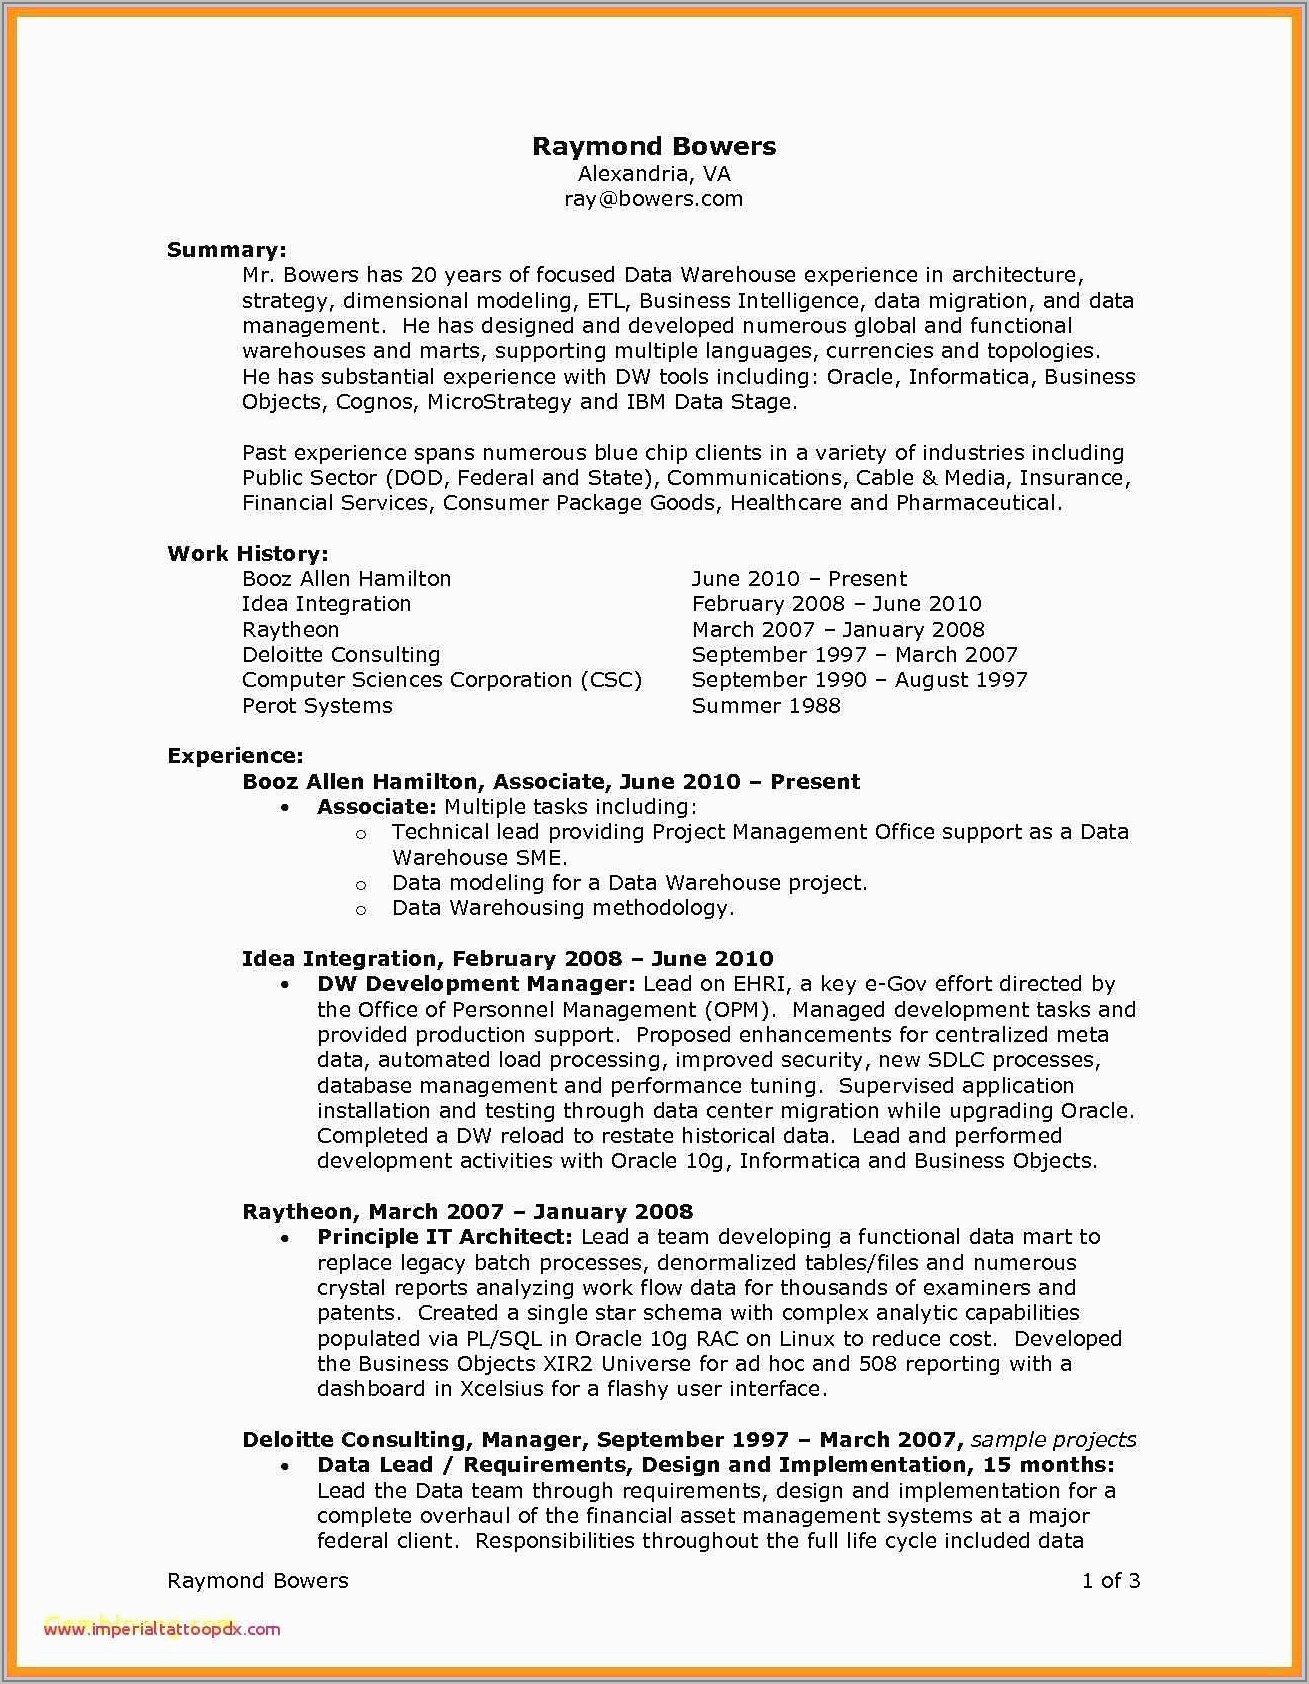 Examples Of Warehouse Manager Resume